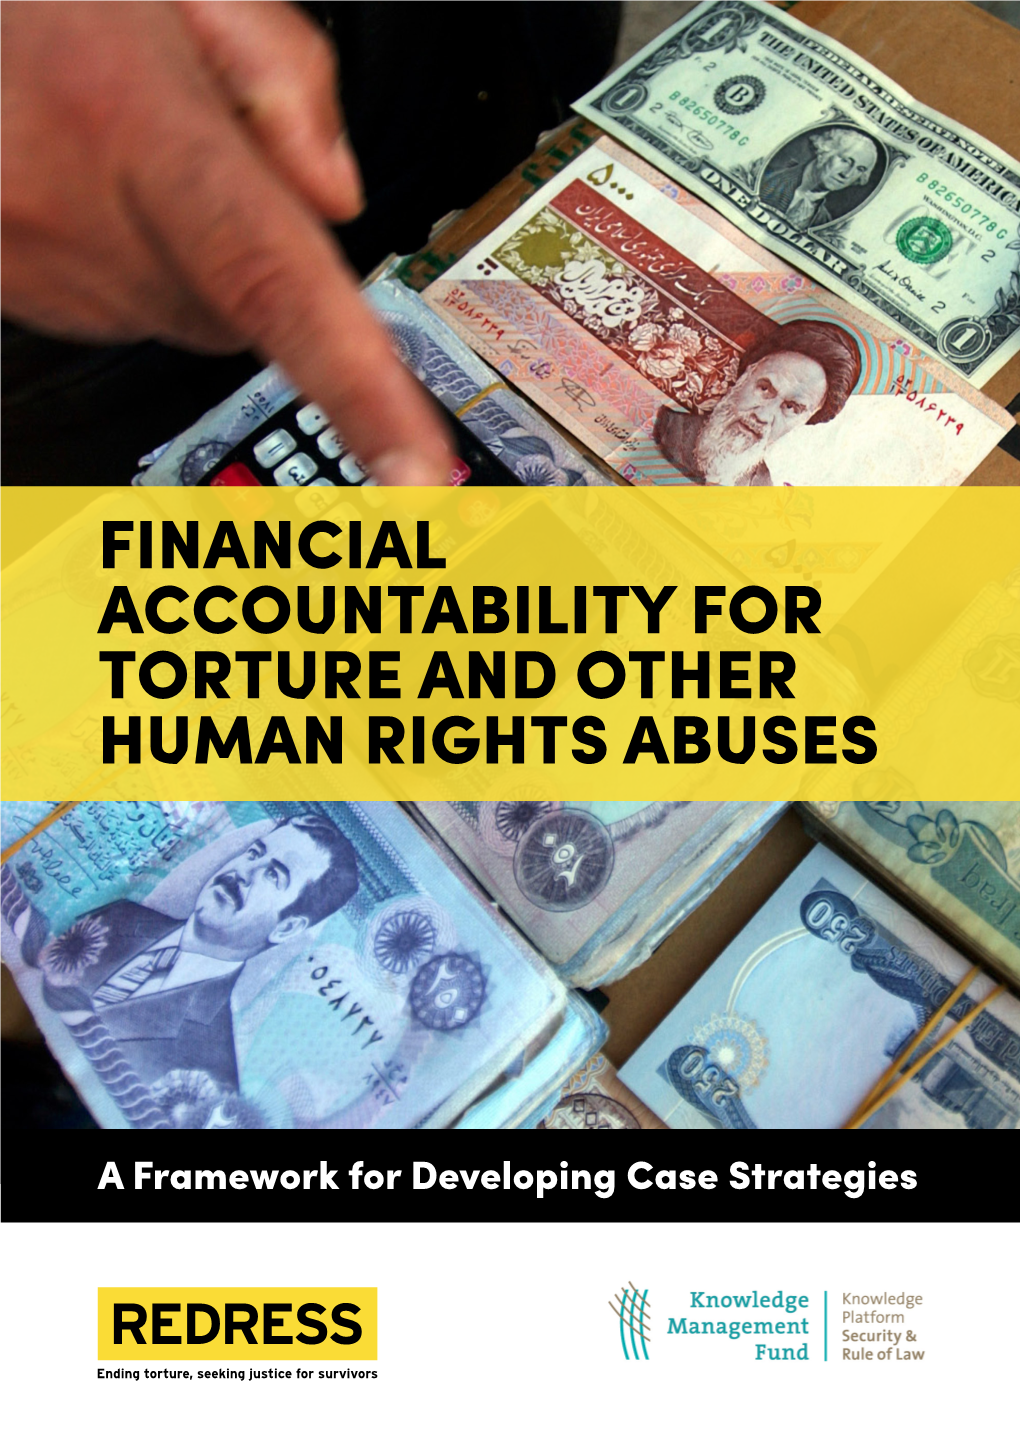 Financial Accountability for Torture and Other Human Rights Abuses